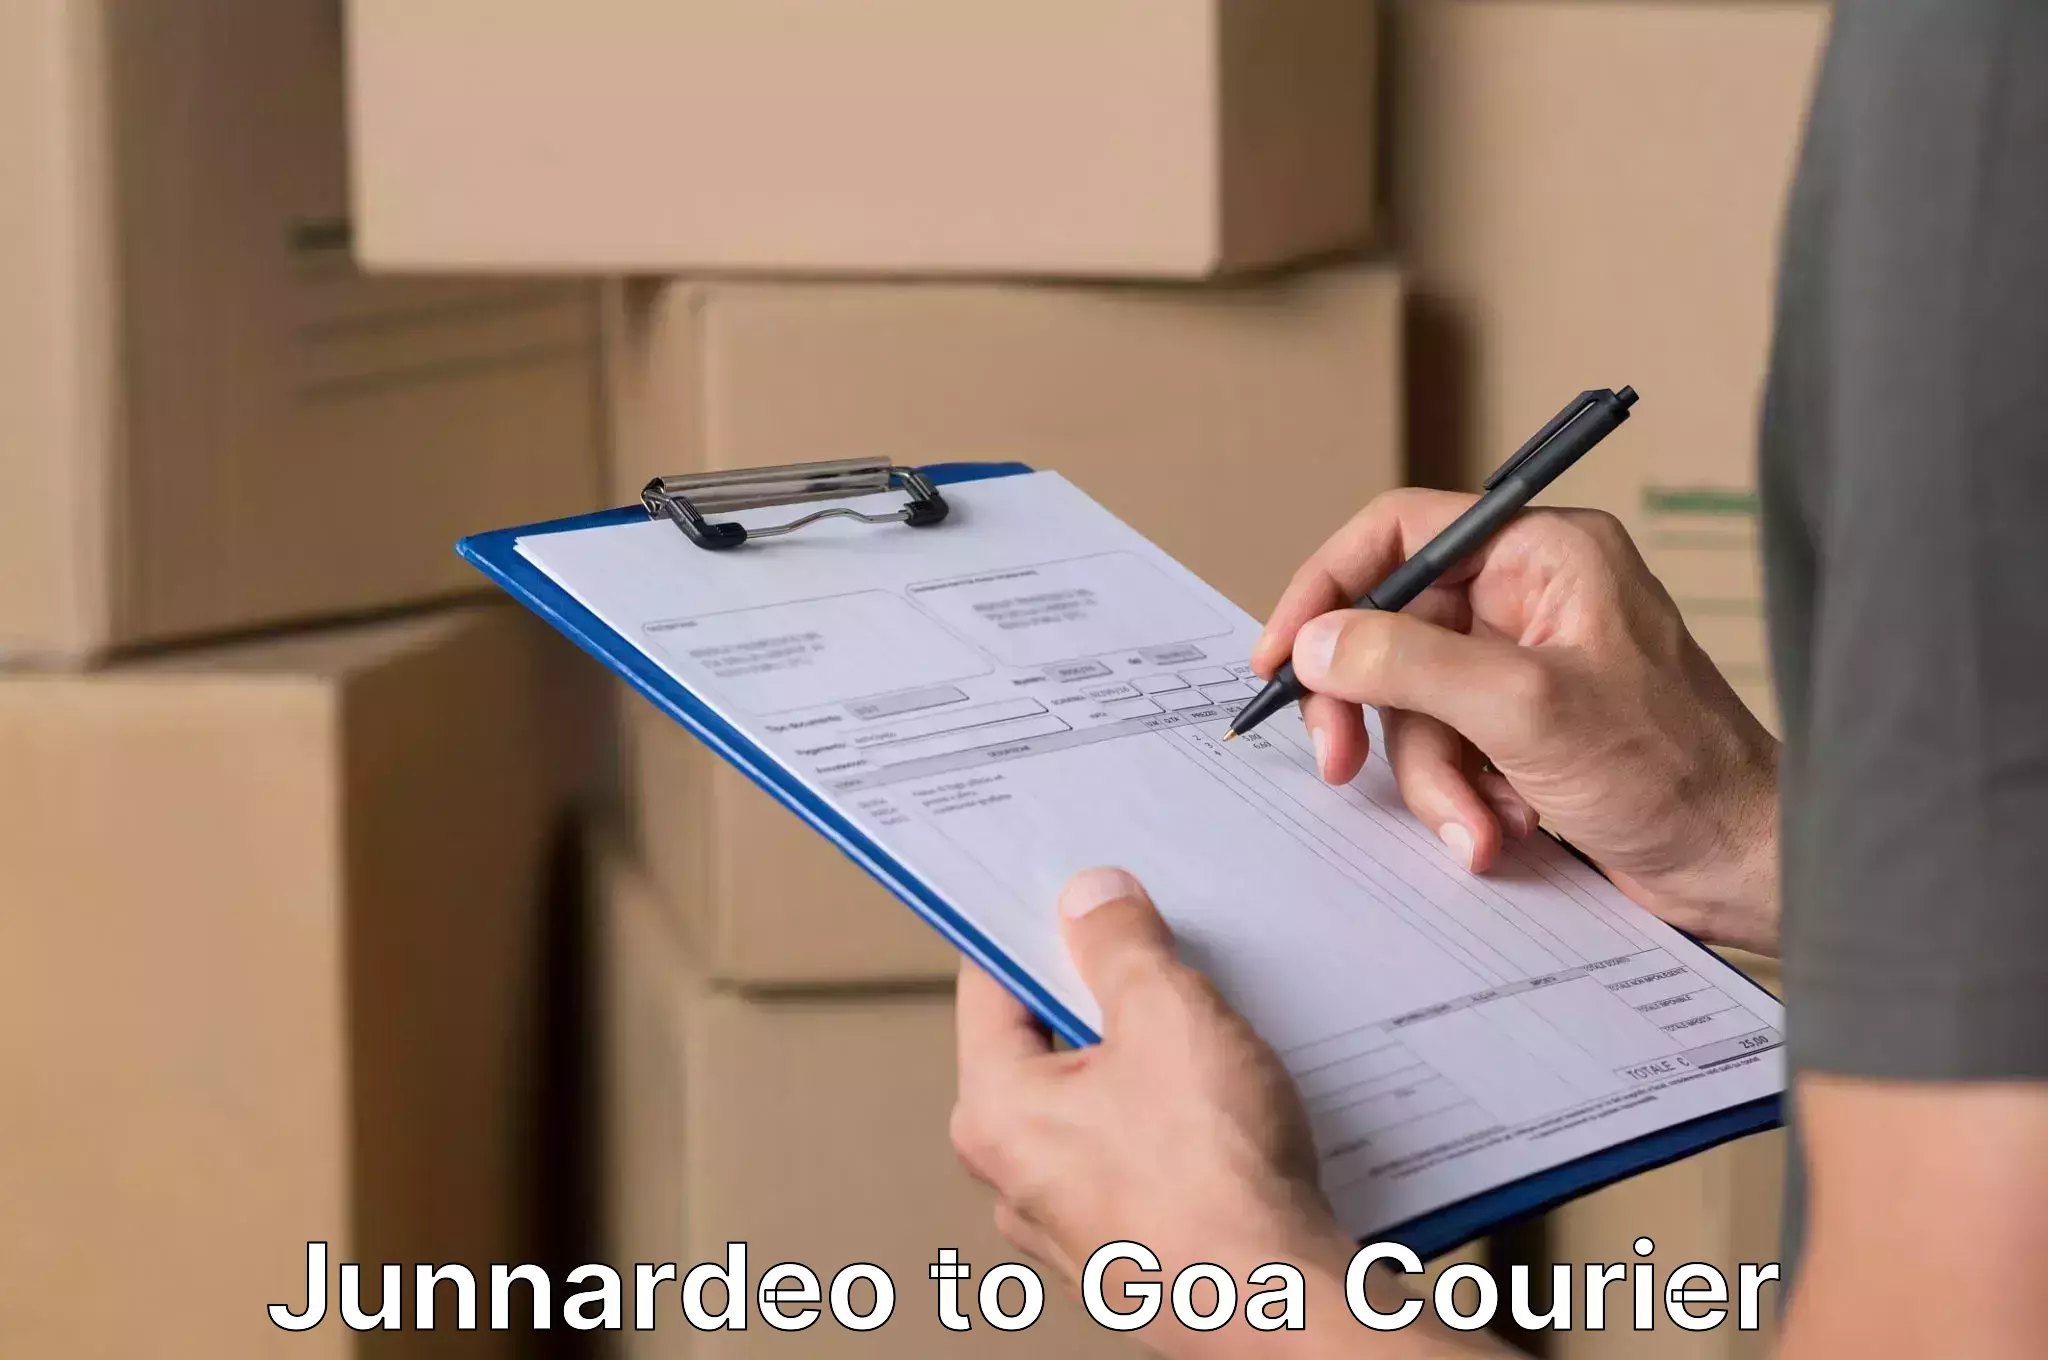 Household transport experts Junnardeo to Goa